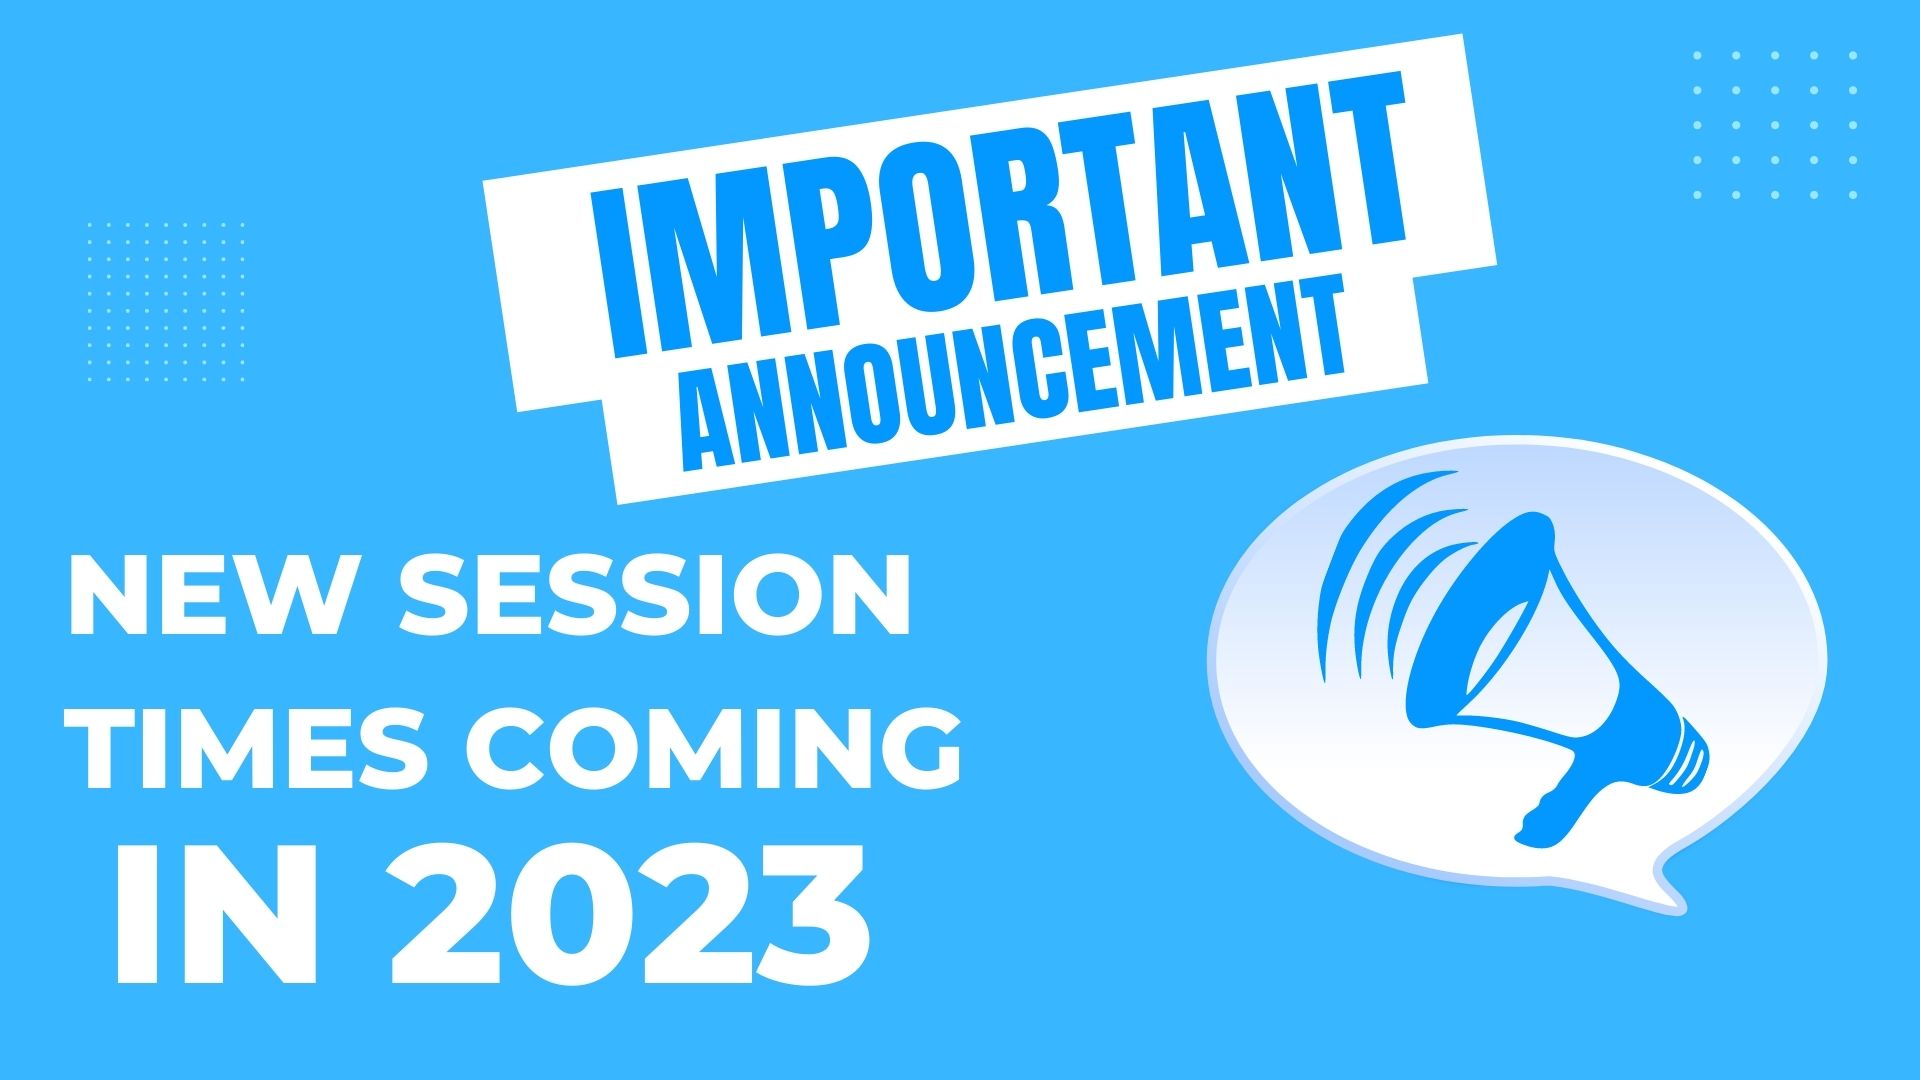 New Session Times for 2023